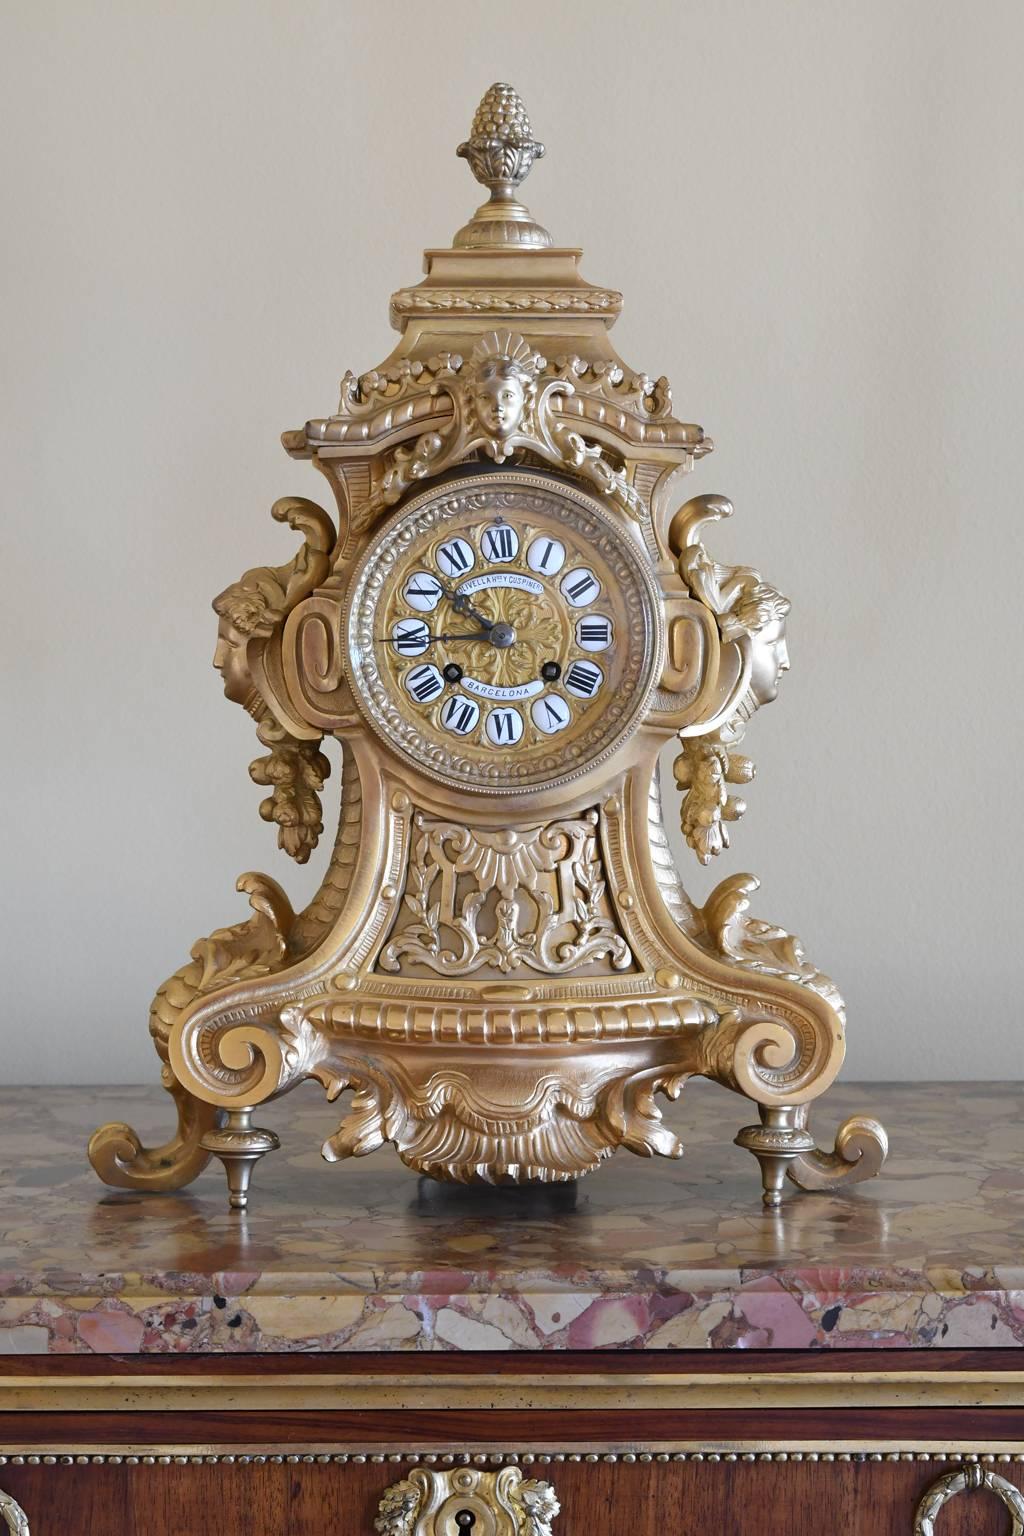 A very lovely Rococo-style mantel clock in bronze doré with enamel Roman numerals on the dial. Made in France for the firm of Olivella Hermanos & Cuspinera in Barcelona, Spain, during the Belle Époque period, France, circa 1890.
Clock is